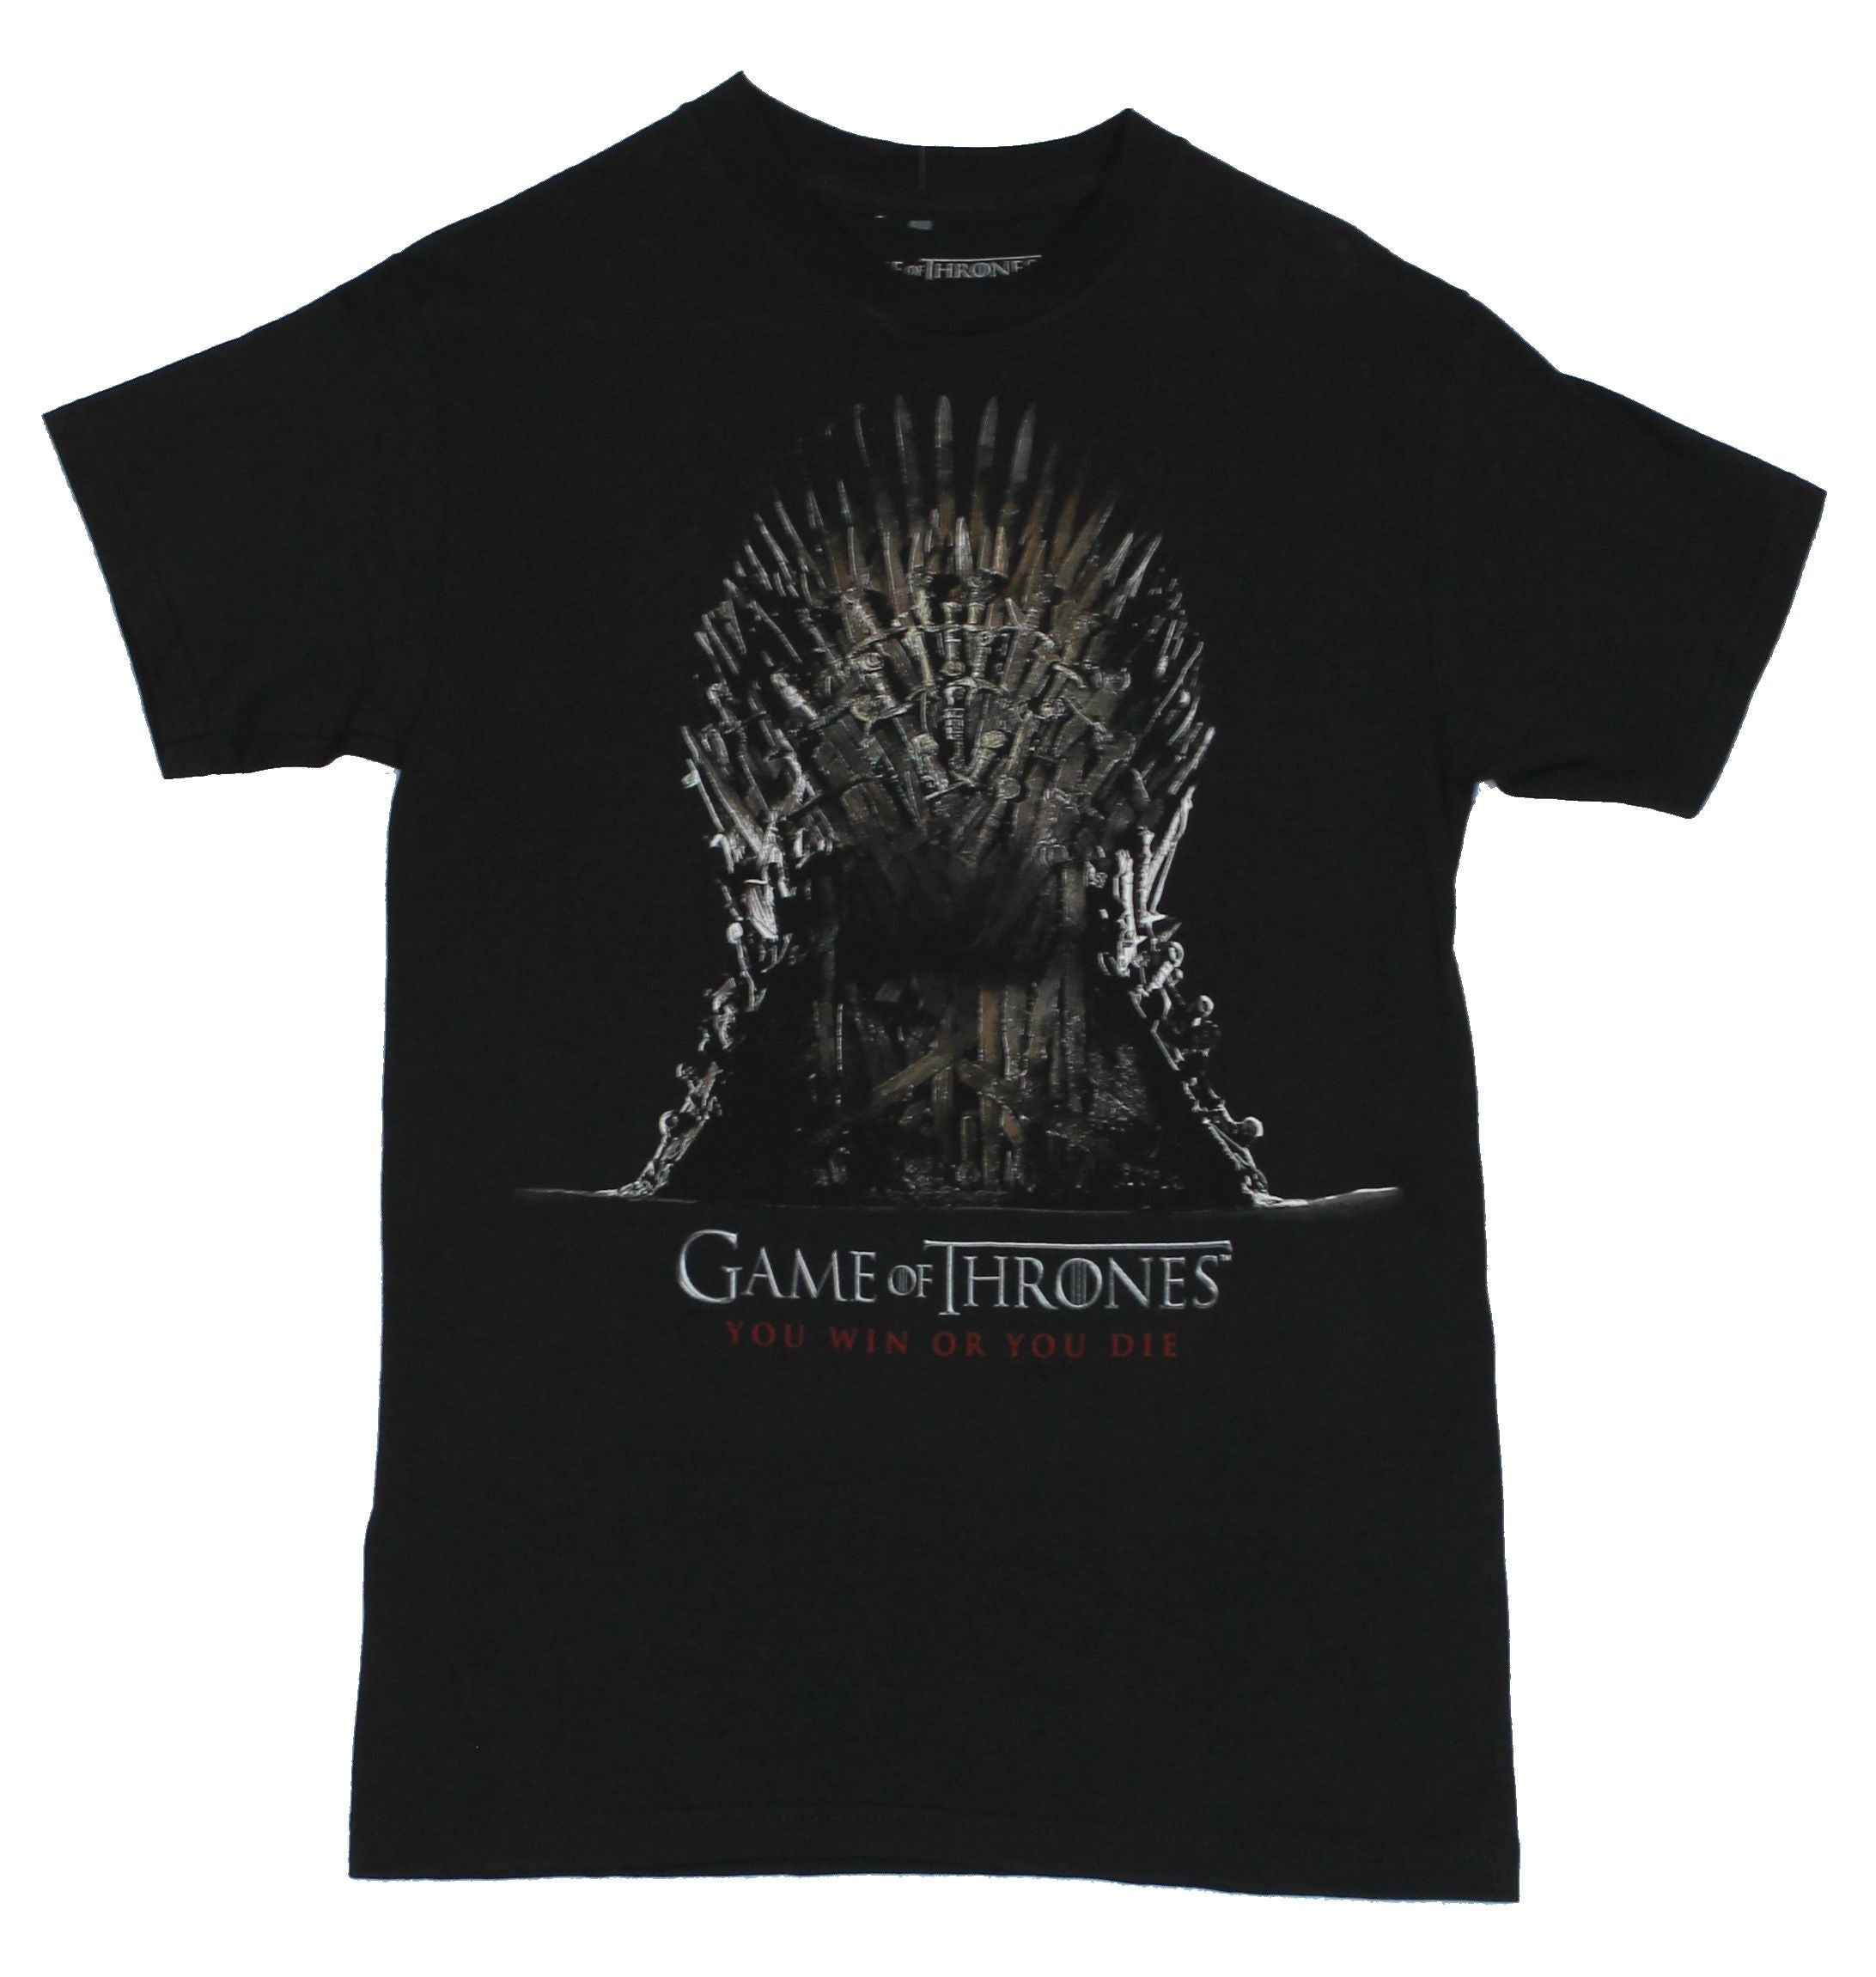 Game of Thrones Mens T-Shirt  - Win or Die Iron Throne Image on Black